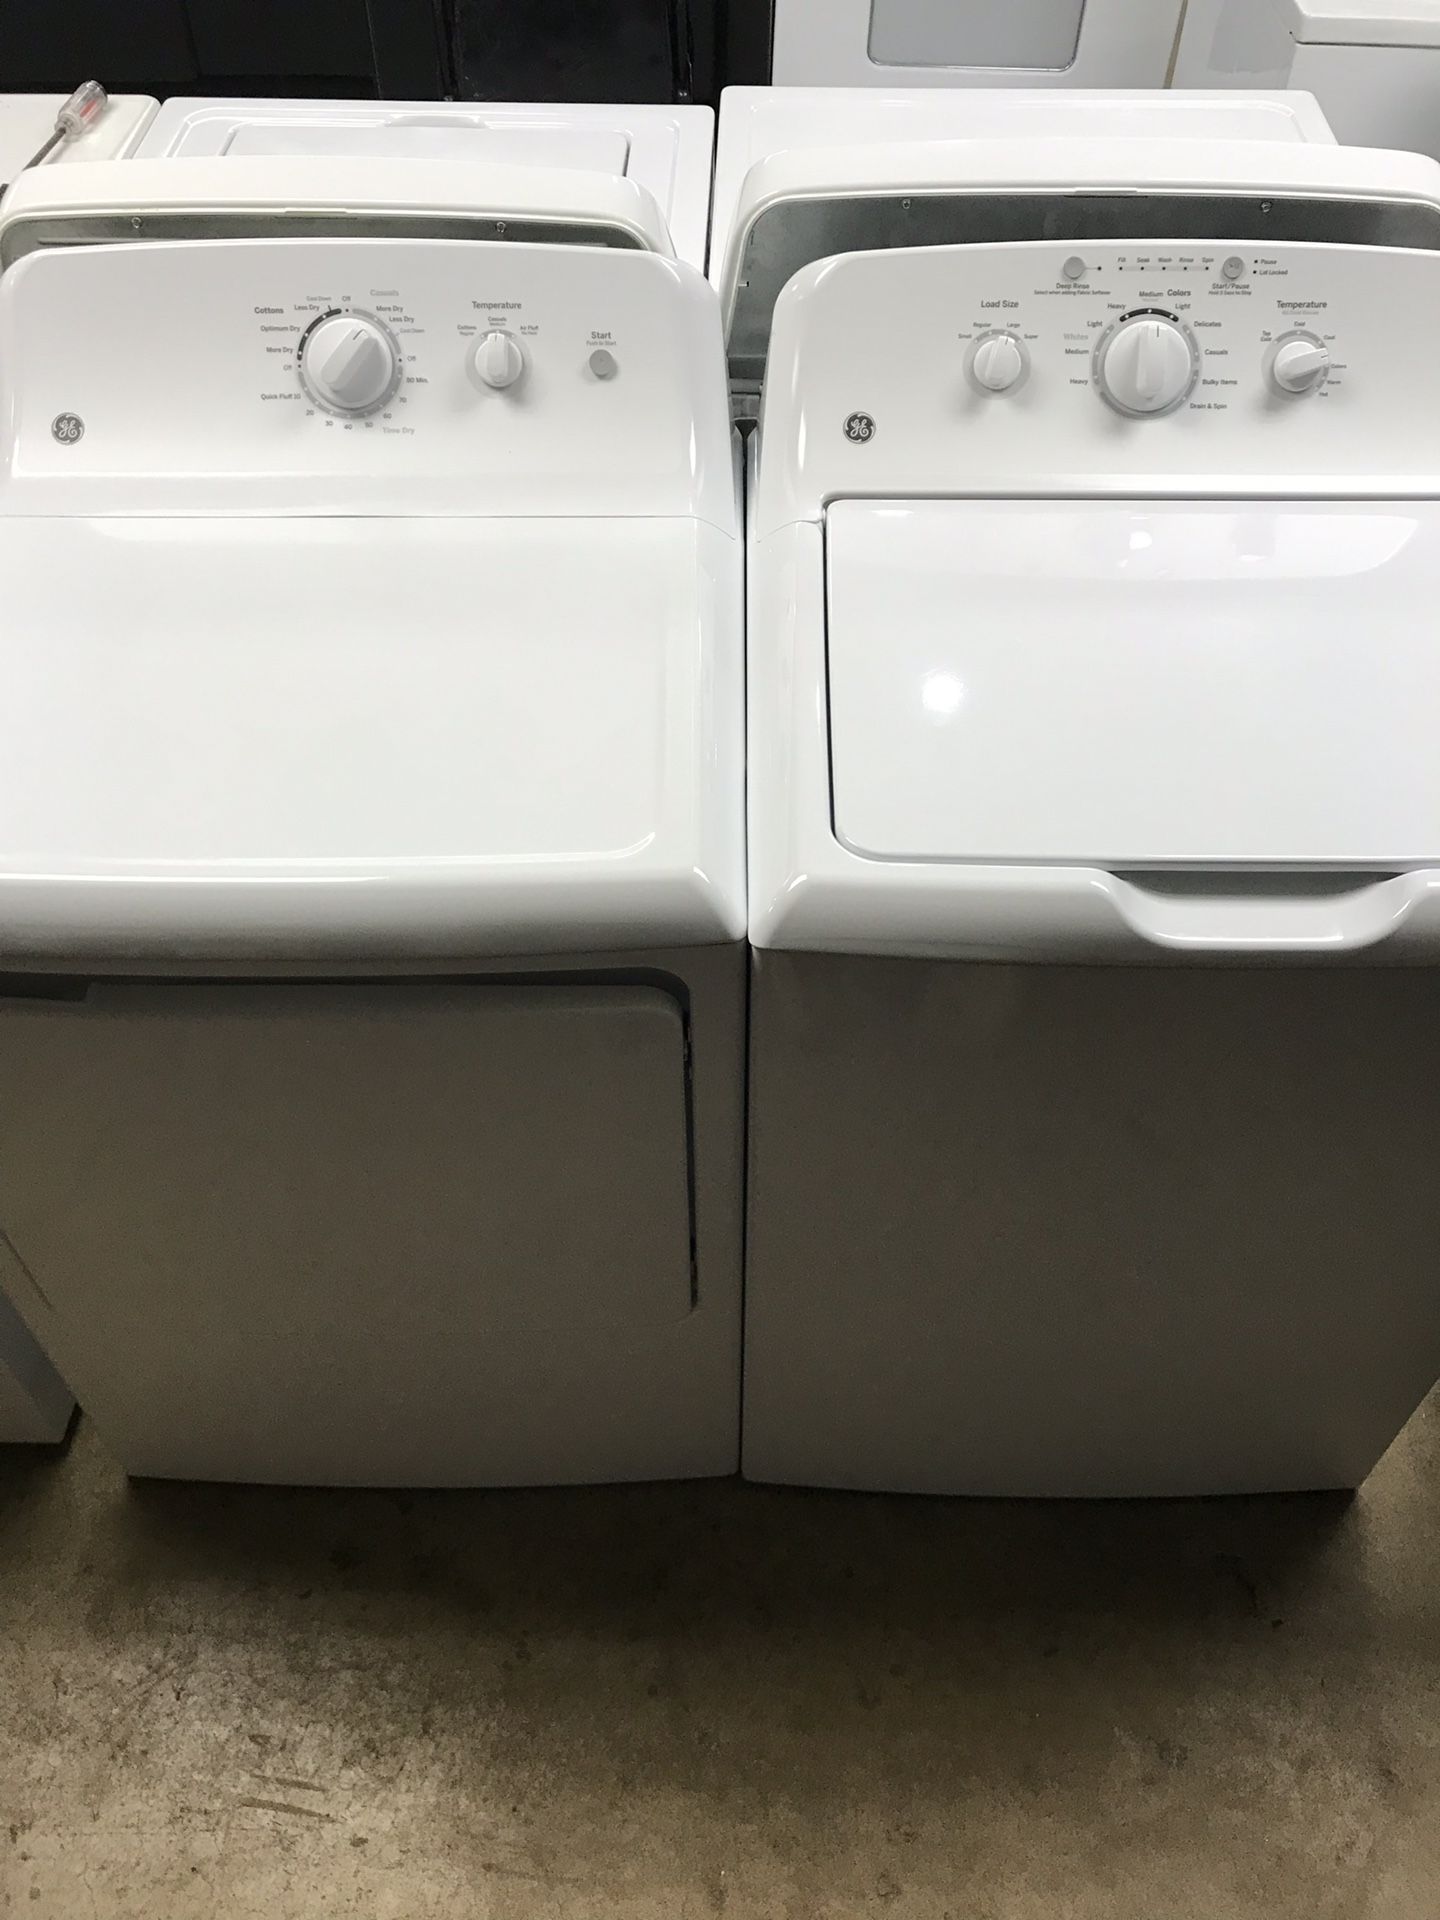 GE Washer and Electric Dryer